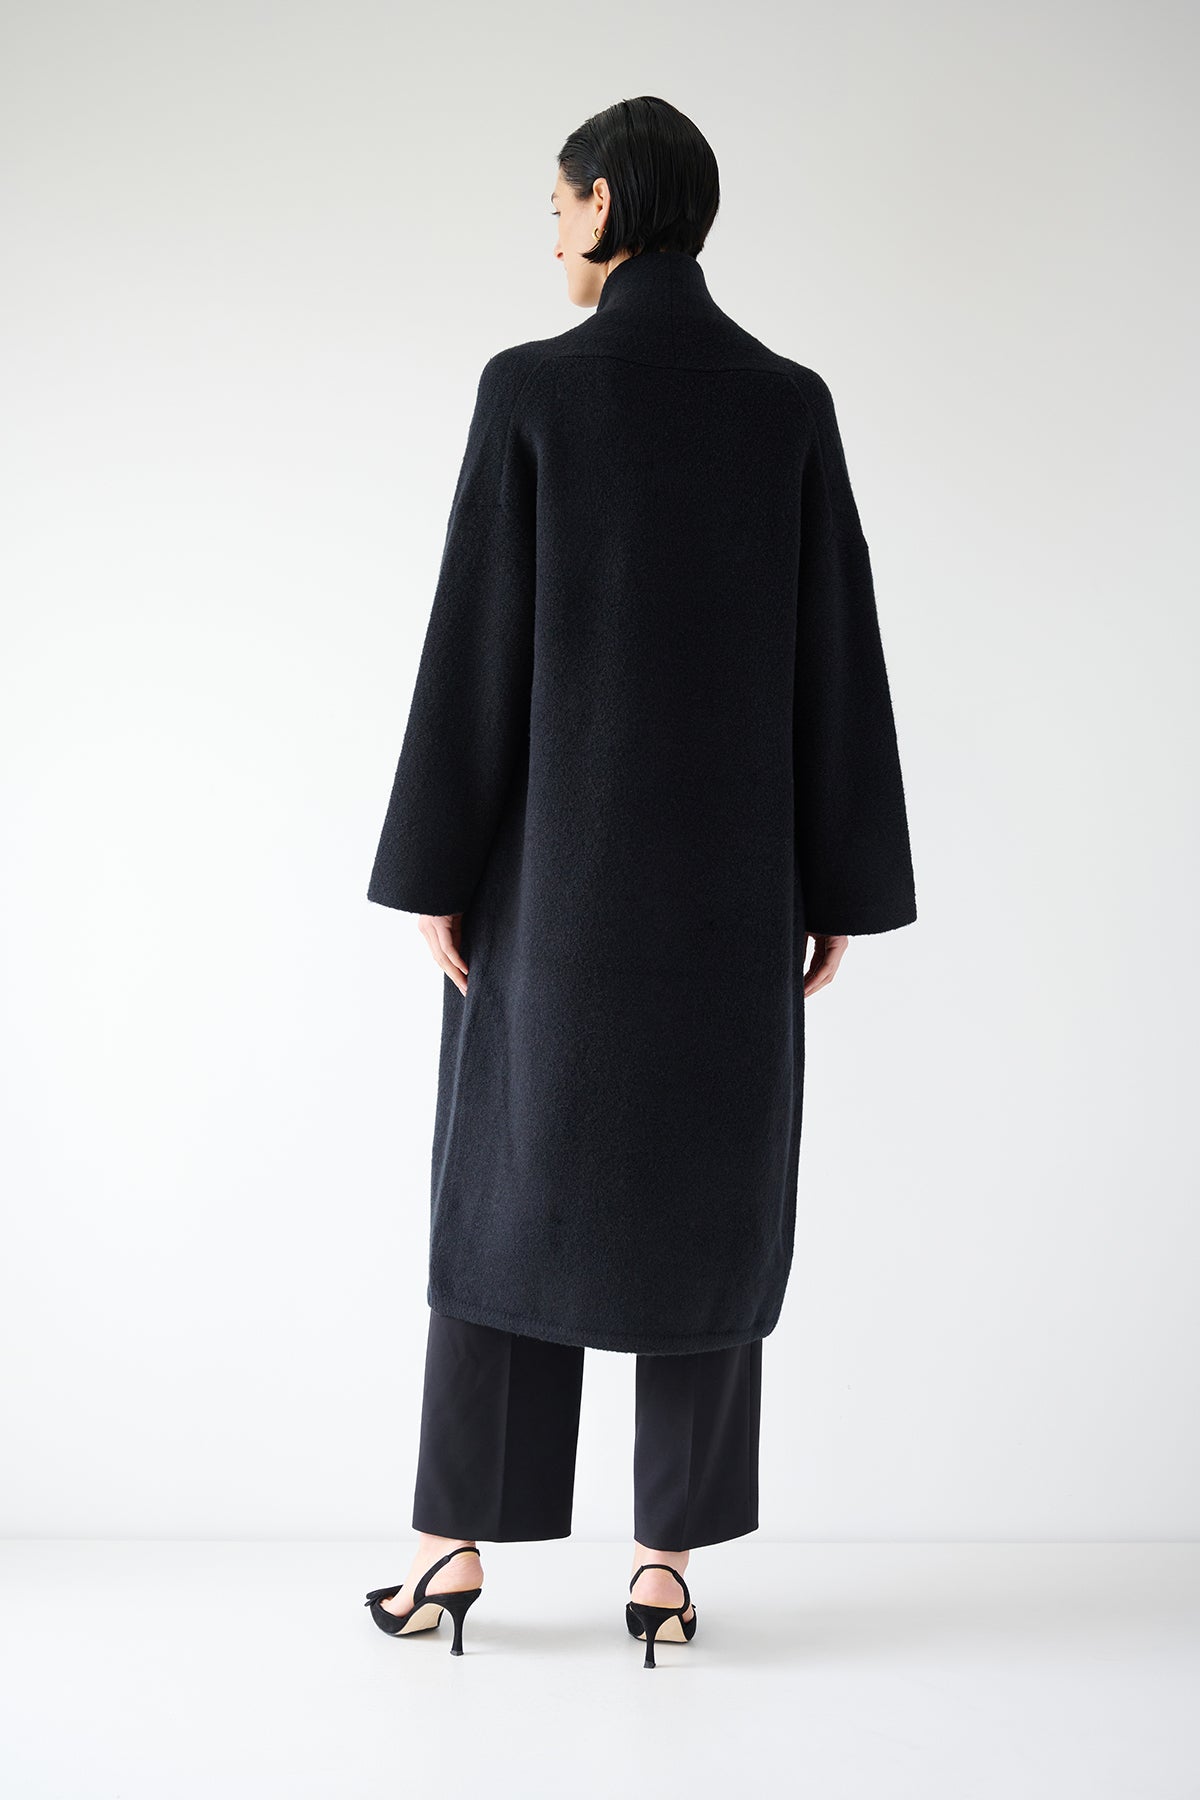   The back view of a woman wearing a CARMEL COAT by Velvet by Jenny Graham. 